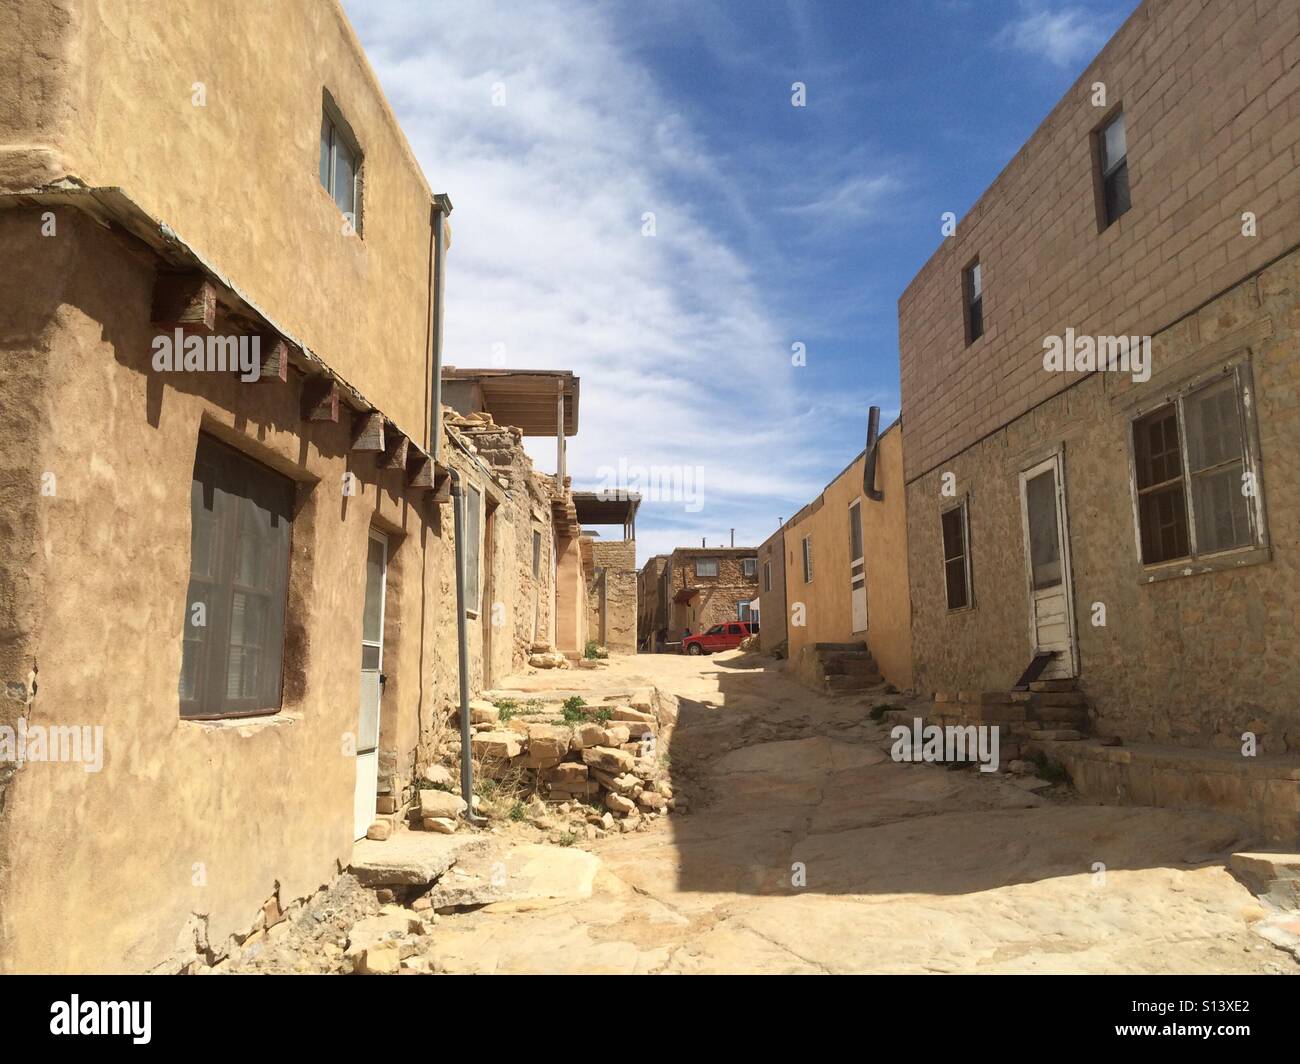 The old city of Acoma Pueblo in New Mexico. Stock Photo